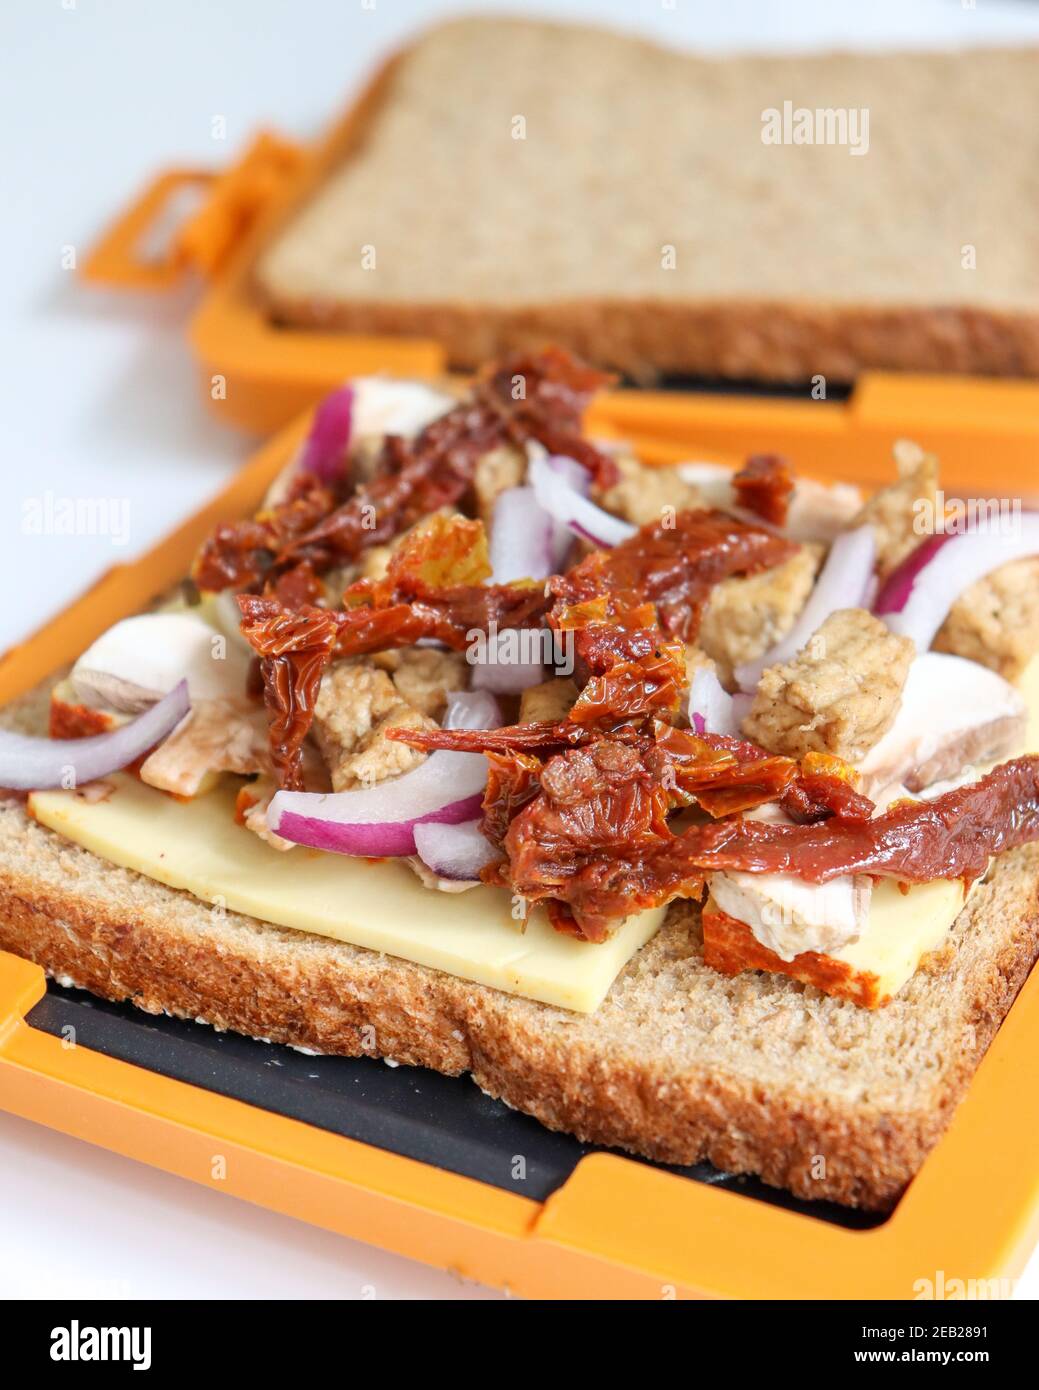 https://c8.alamy.com/comp/2EB2891/morphy-richards-mico-toastie-toasted-sandwiches-microwave-cookware-kitchen-food-preparation-cooking-snack-grilled-sandwich-ve-2EB2891.jpg